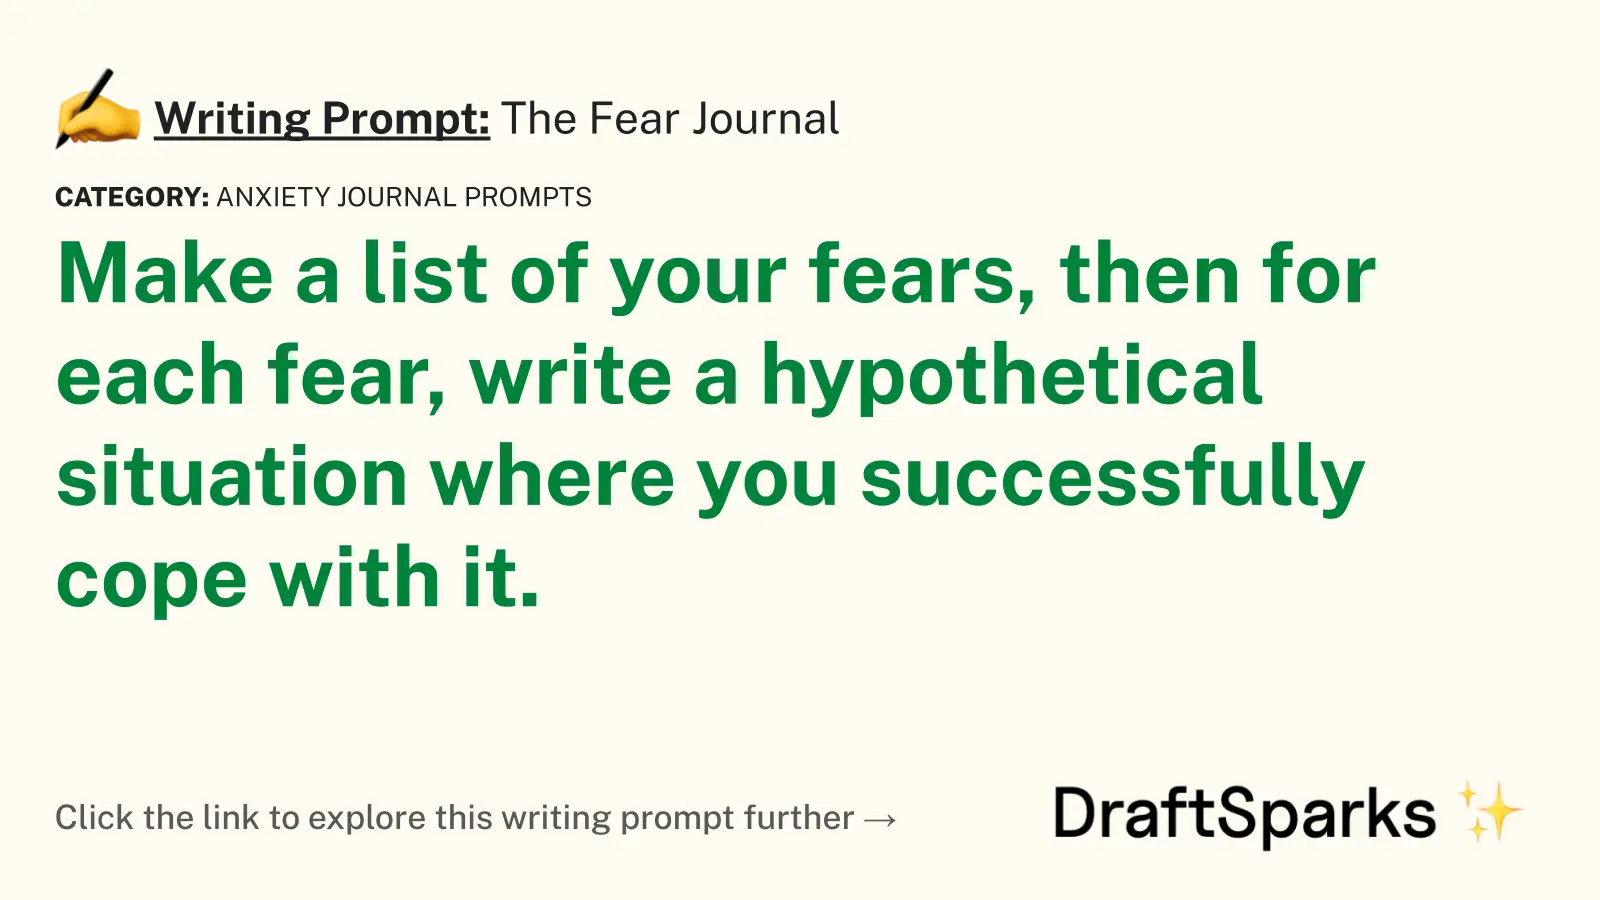 The Fear Journal